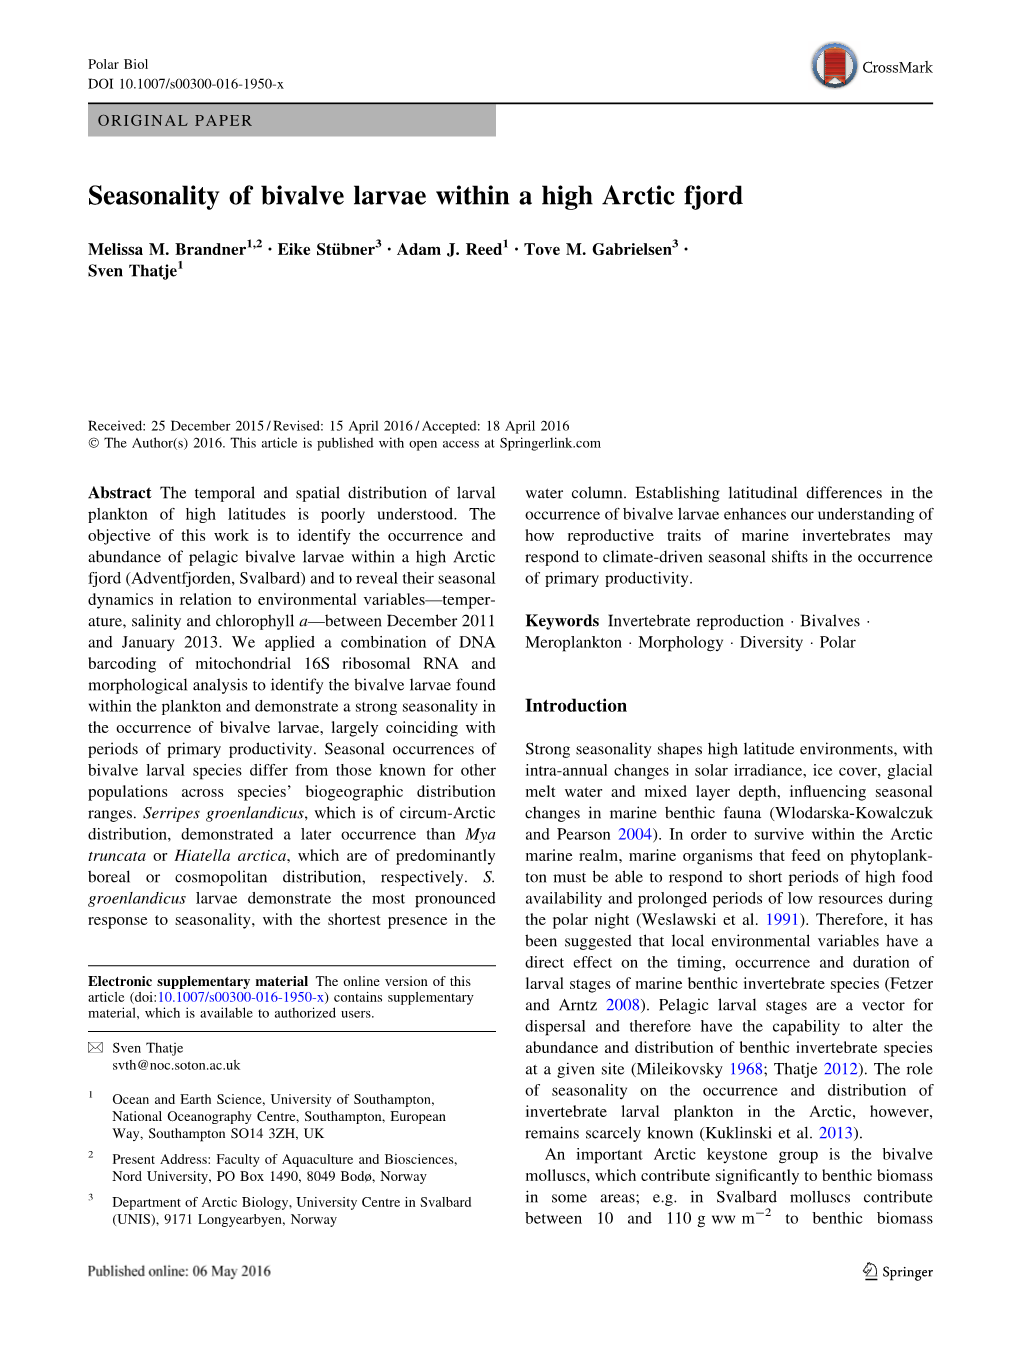 Seasonality of Bivalve Larvae Within a High Arctic Fjord